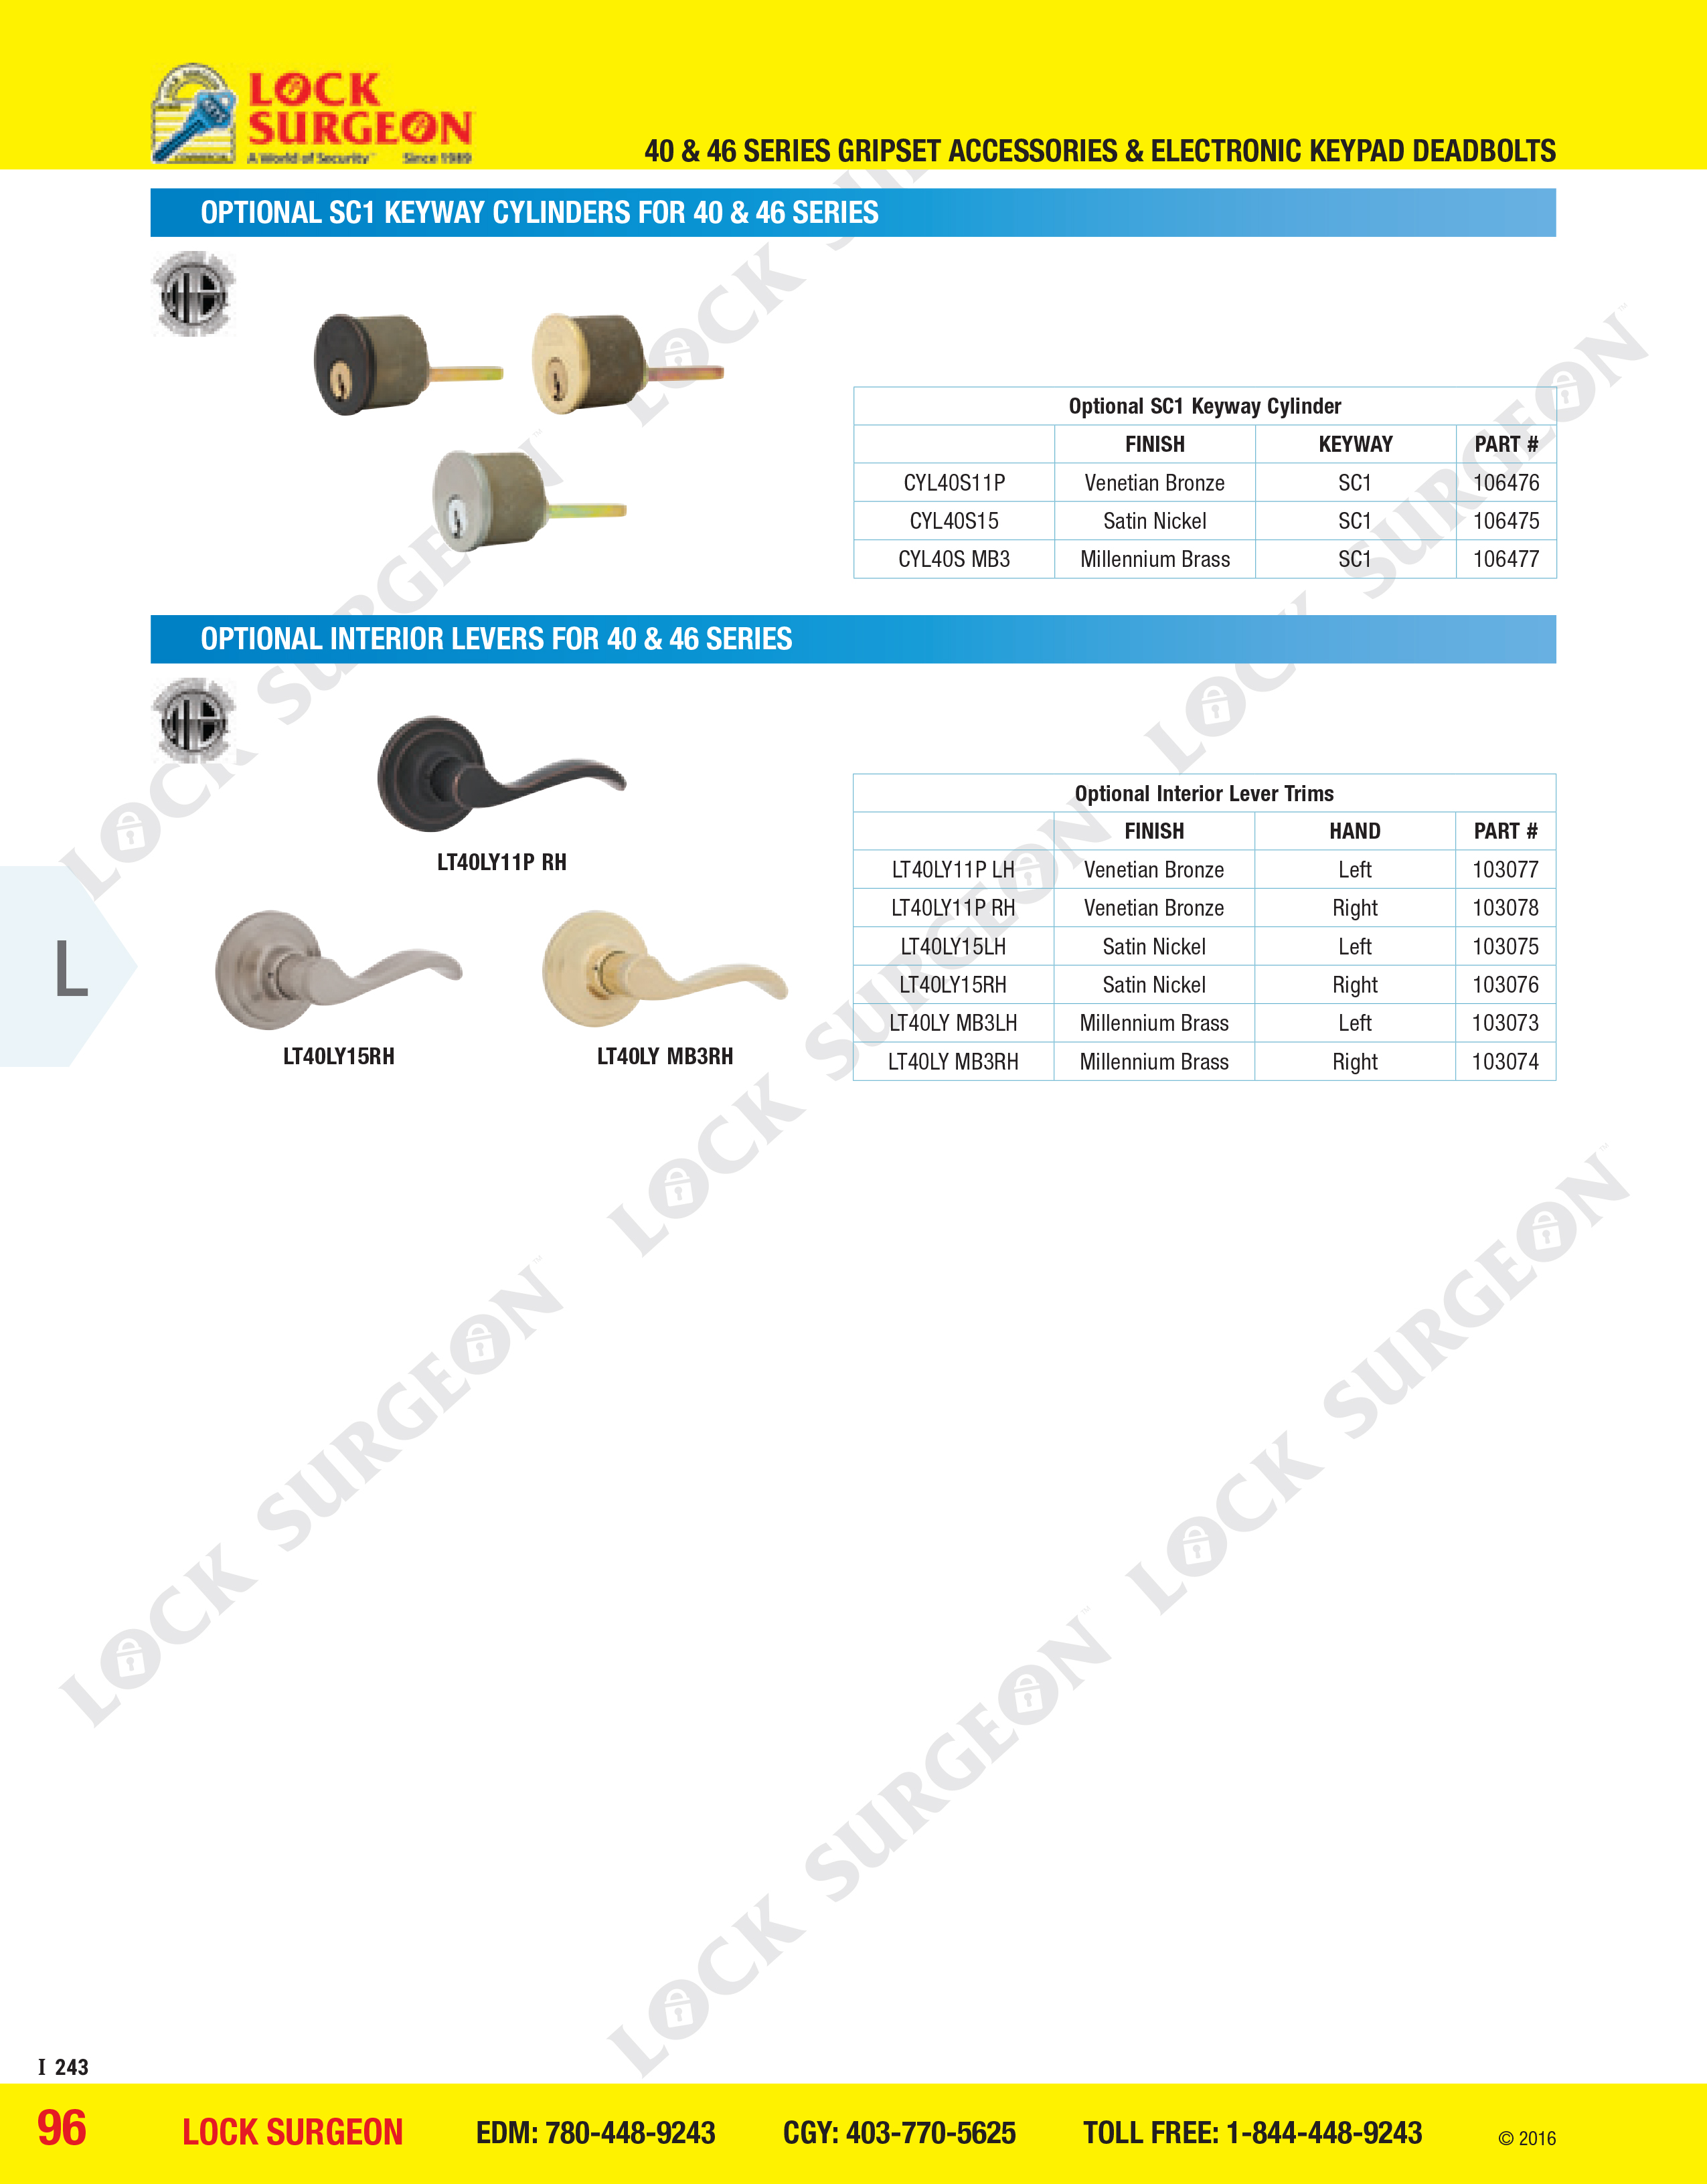 Cochrane alternate locking cylinders and lever handles for interior of grip-sets at Lock Surgeon.